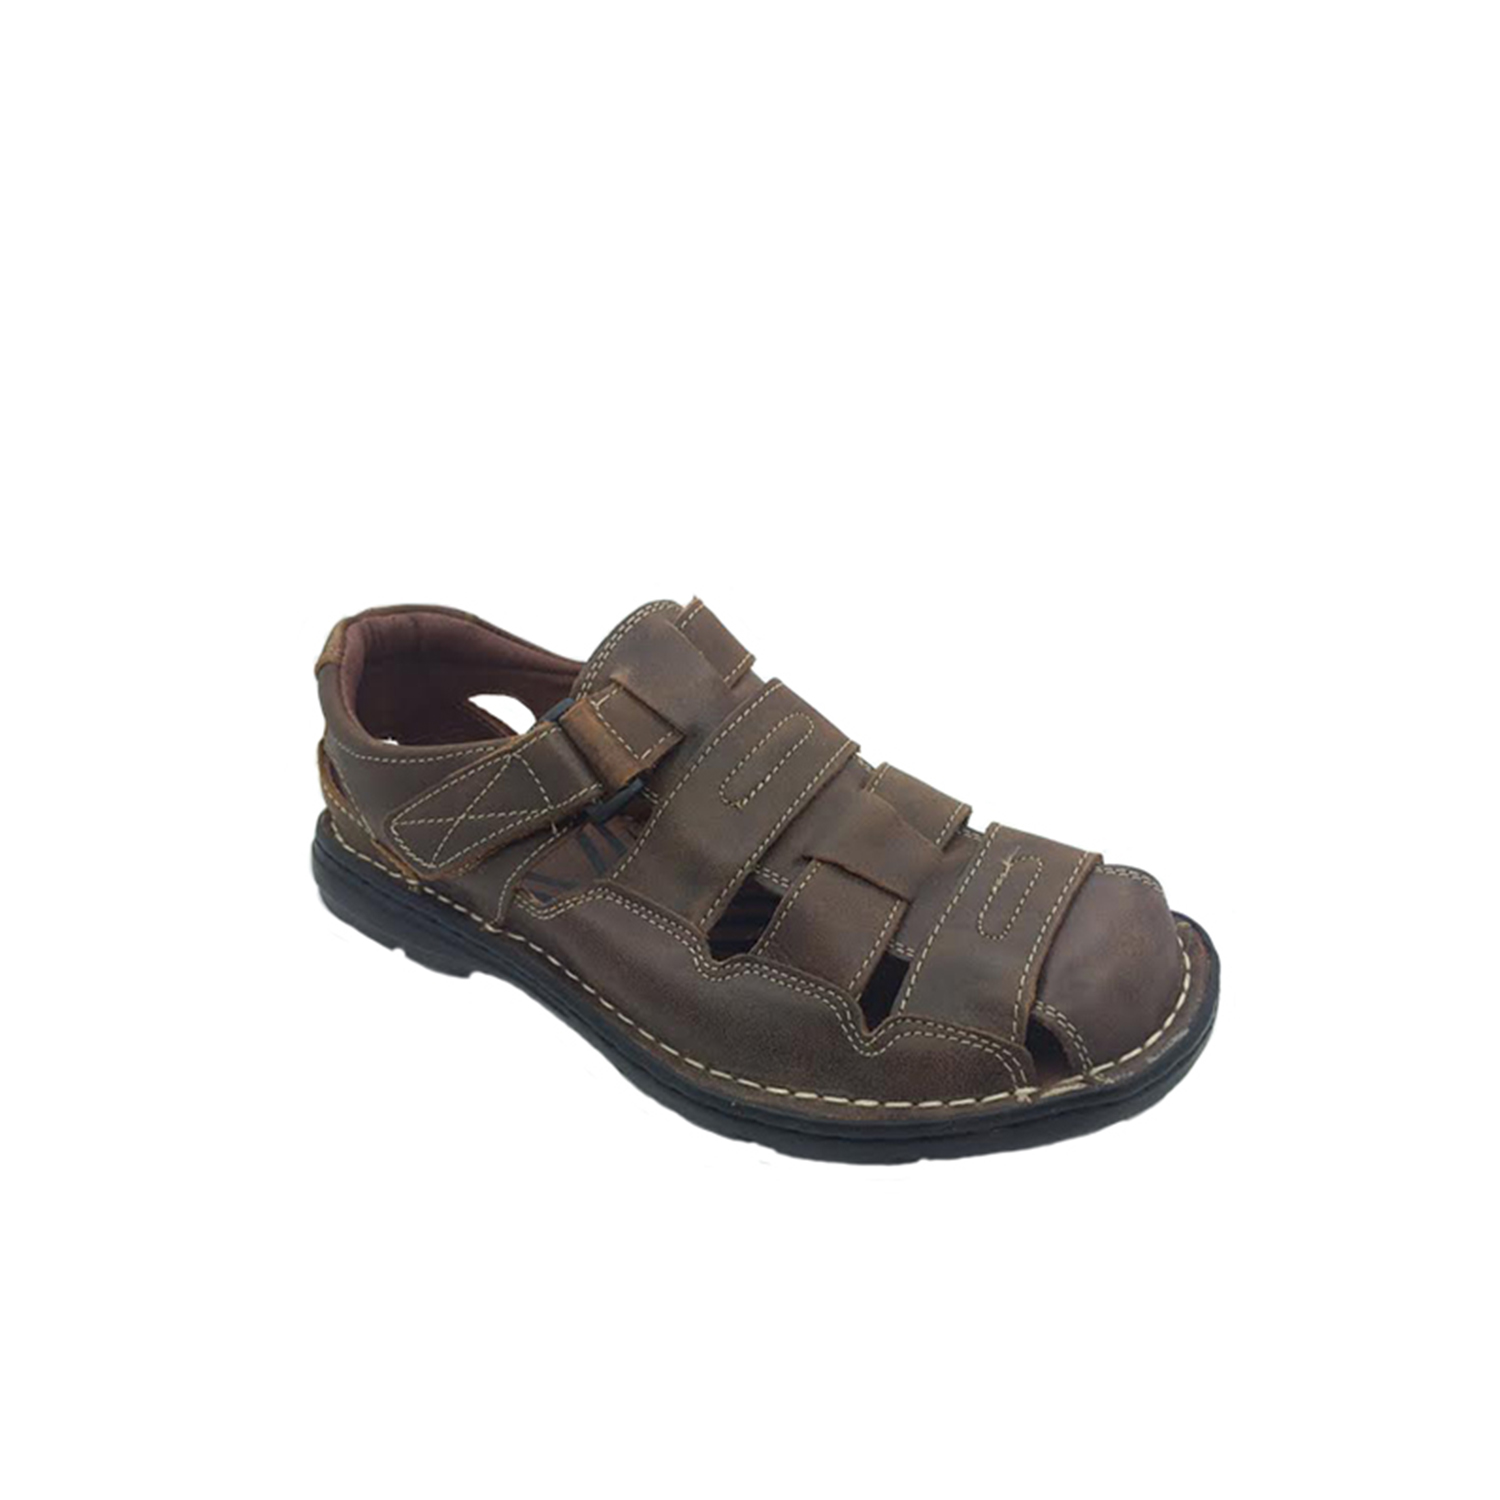 Mens Shoes Sandals Borelli Redfield Brown Rubbed Leather Sandals Size 6 ...